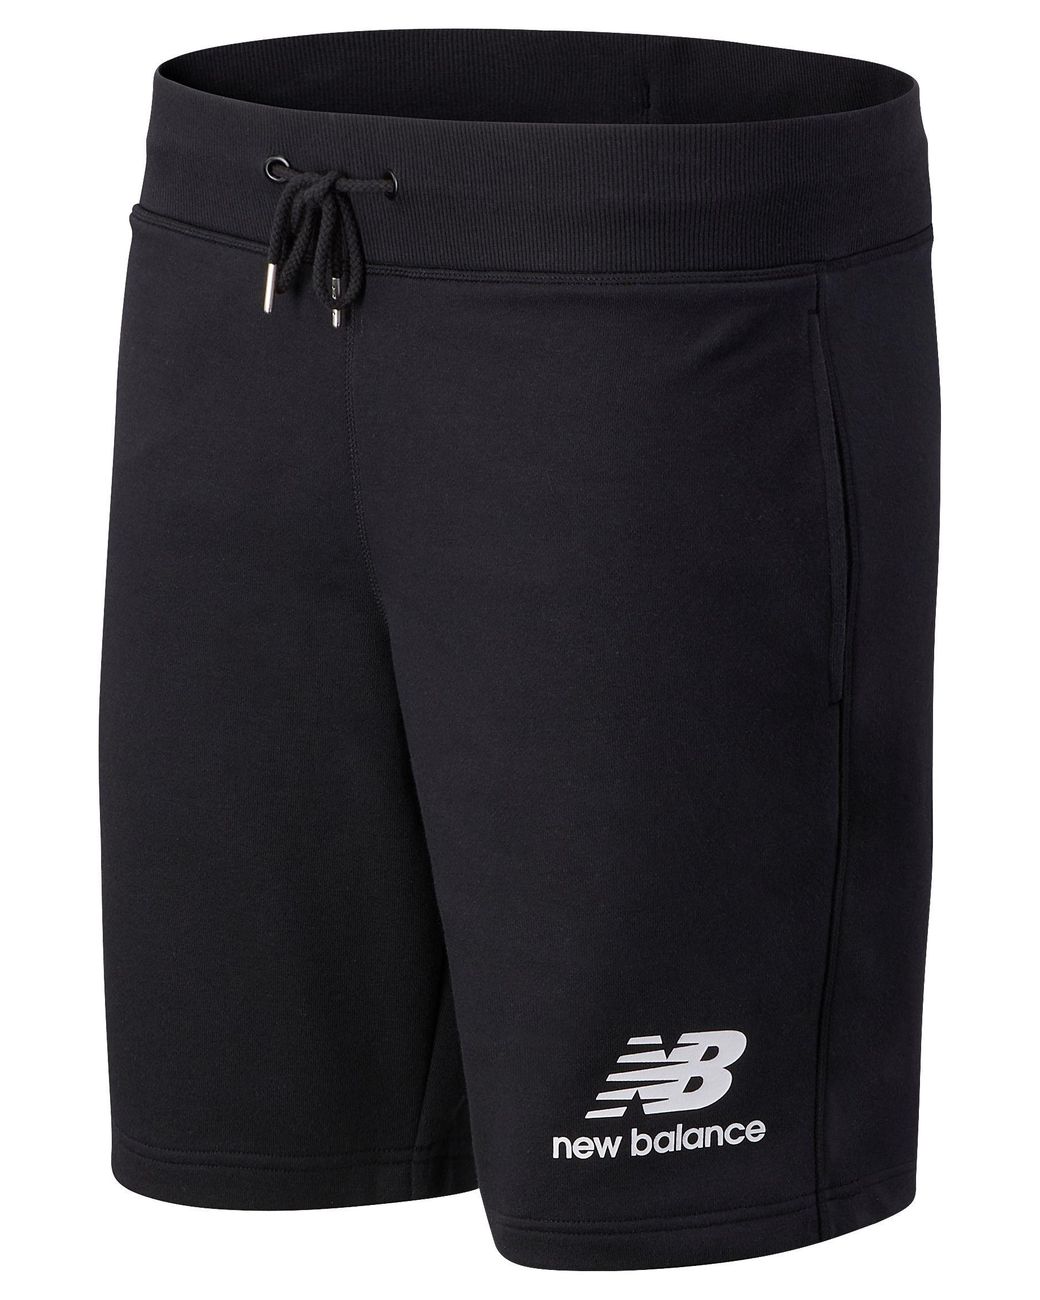 New Balance Nb Essentials Stacked Logo Short in Black for Men - Lyst